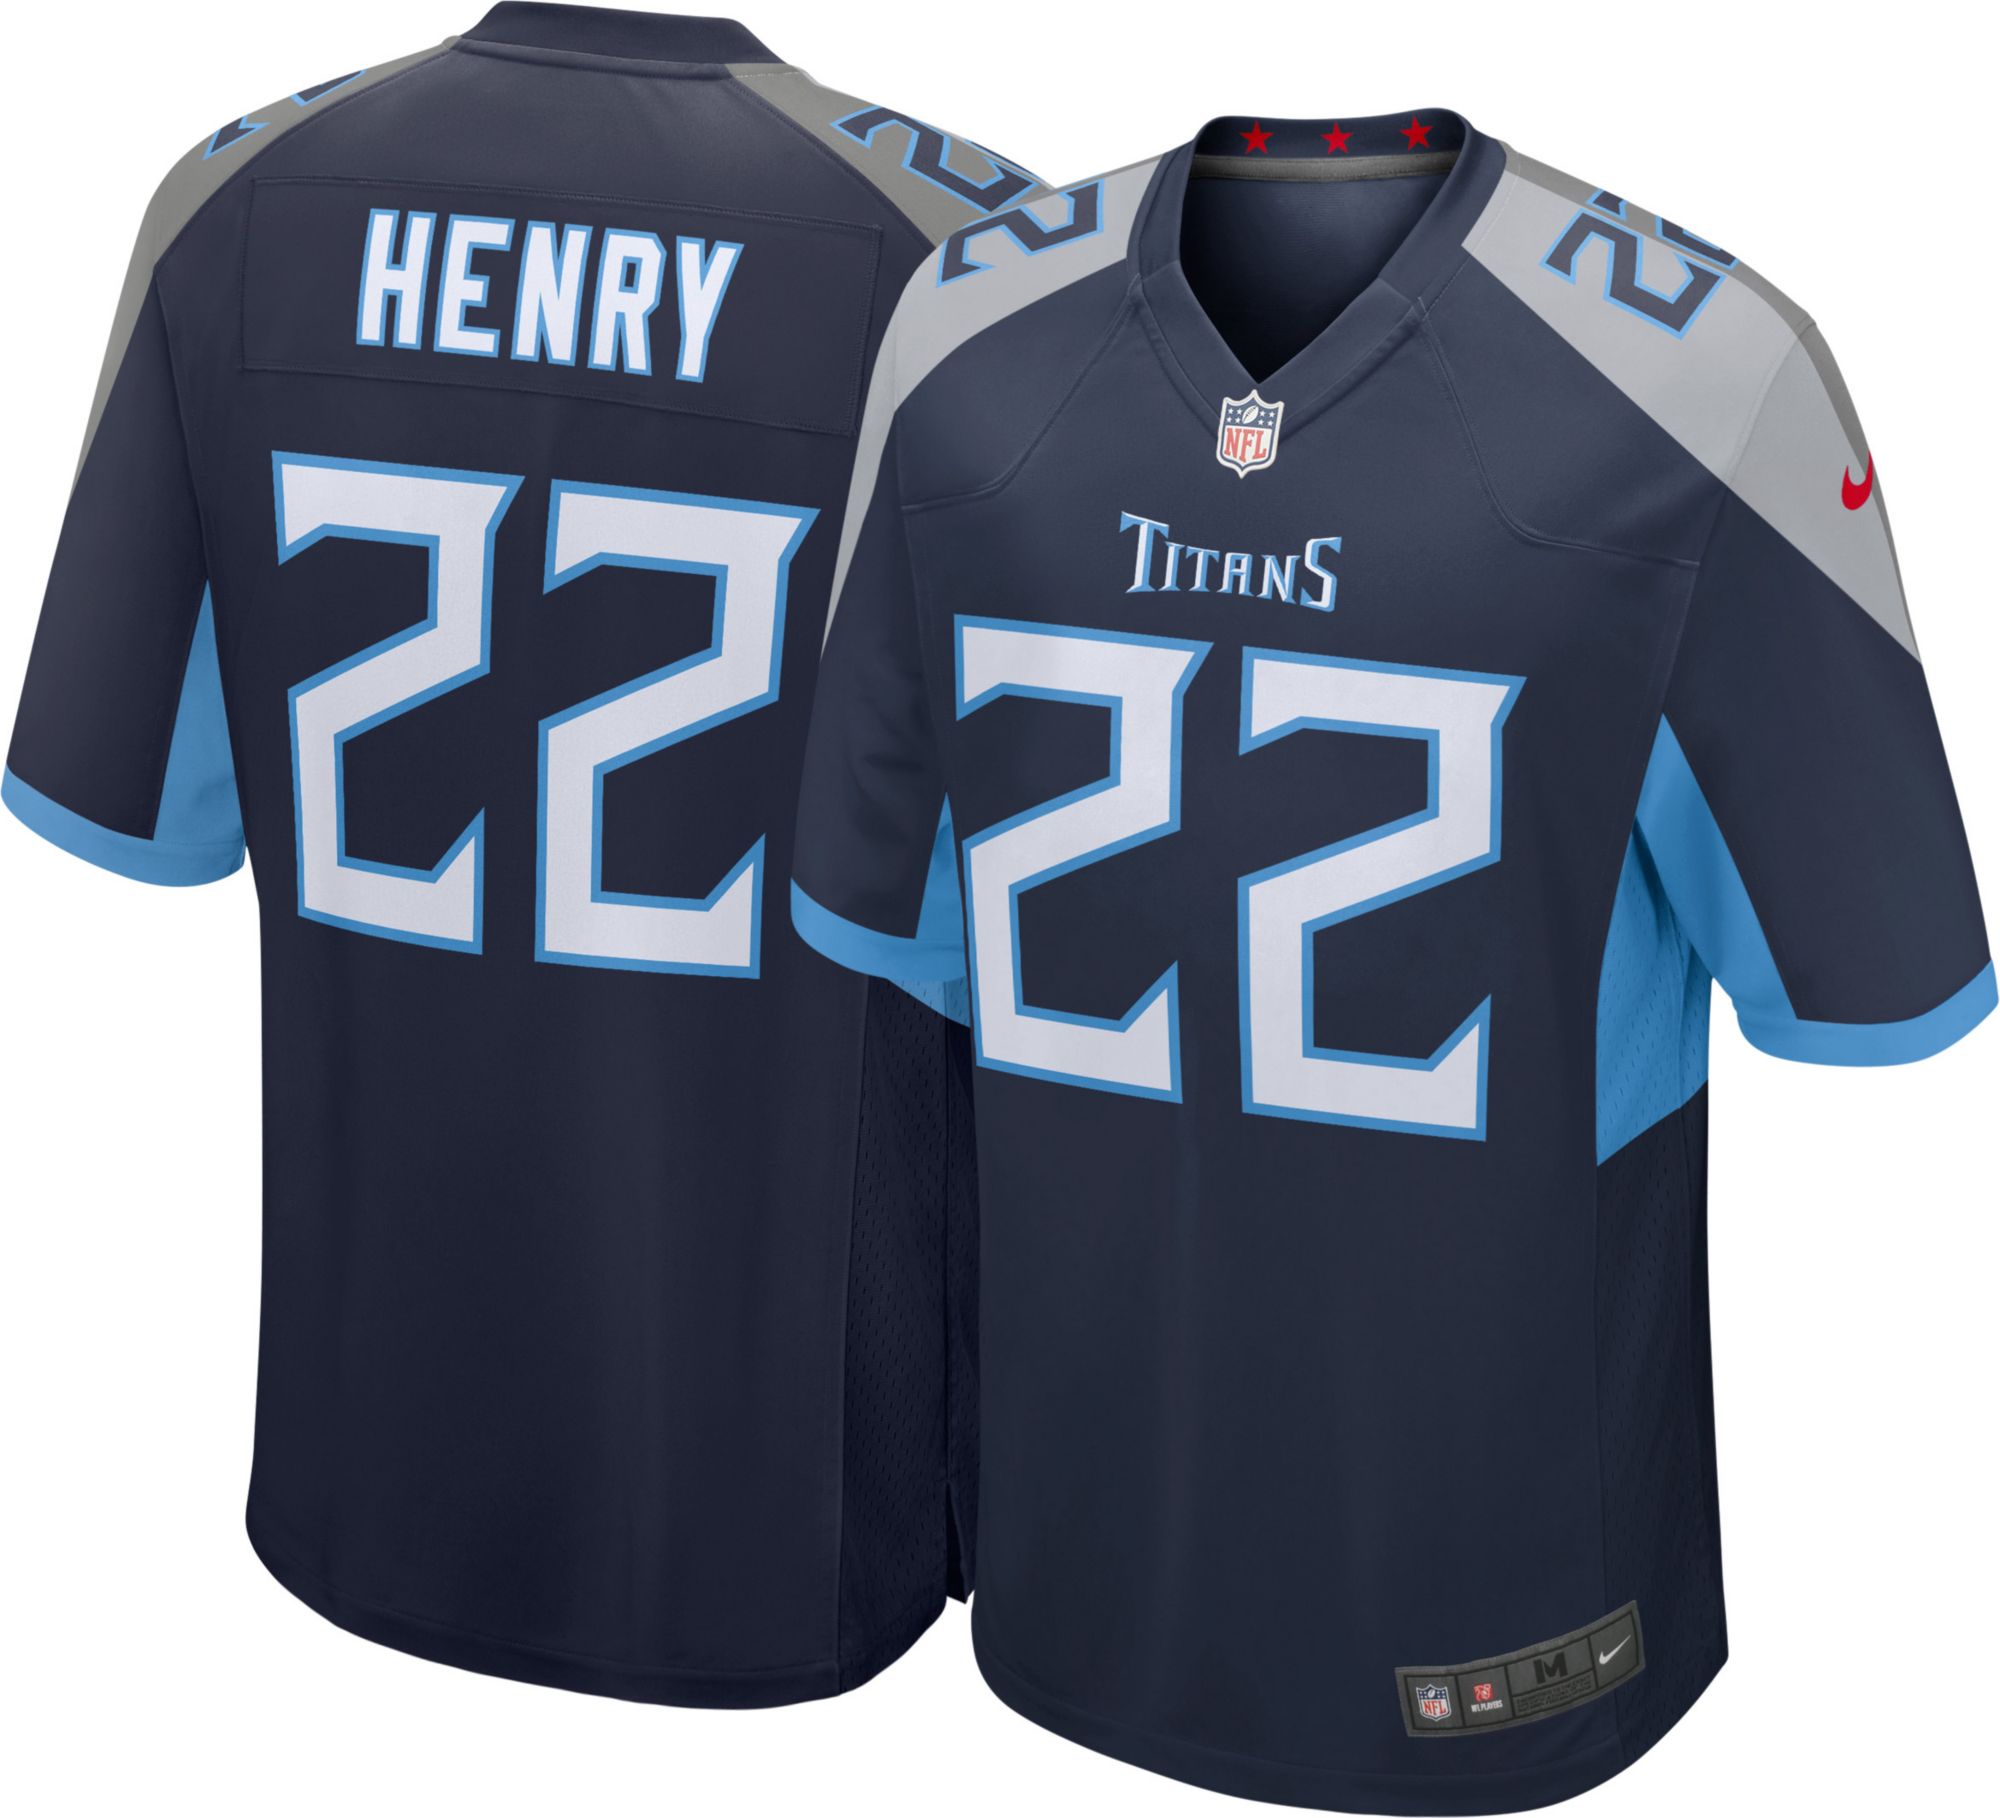 Tennessee Titans clothing